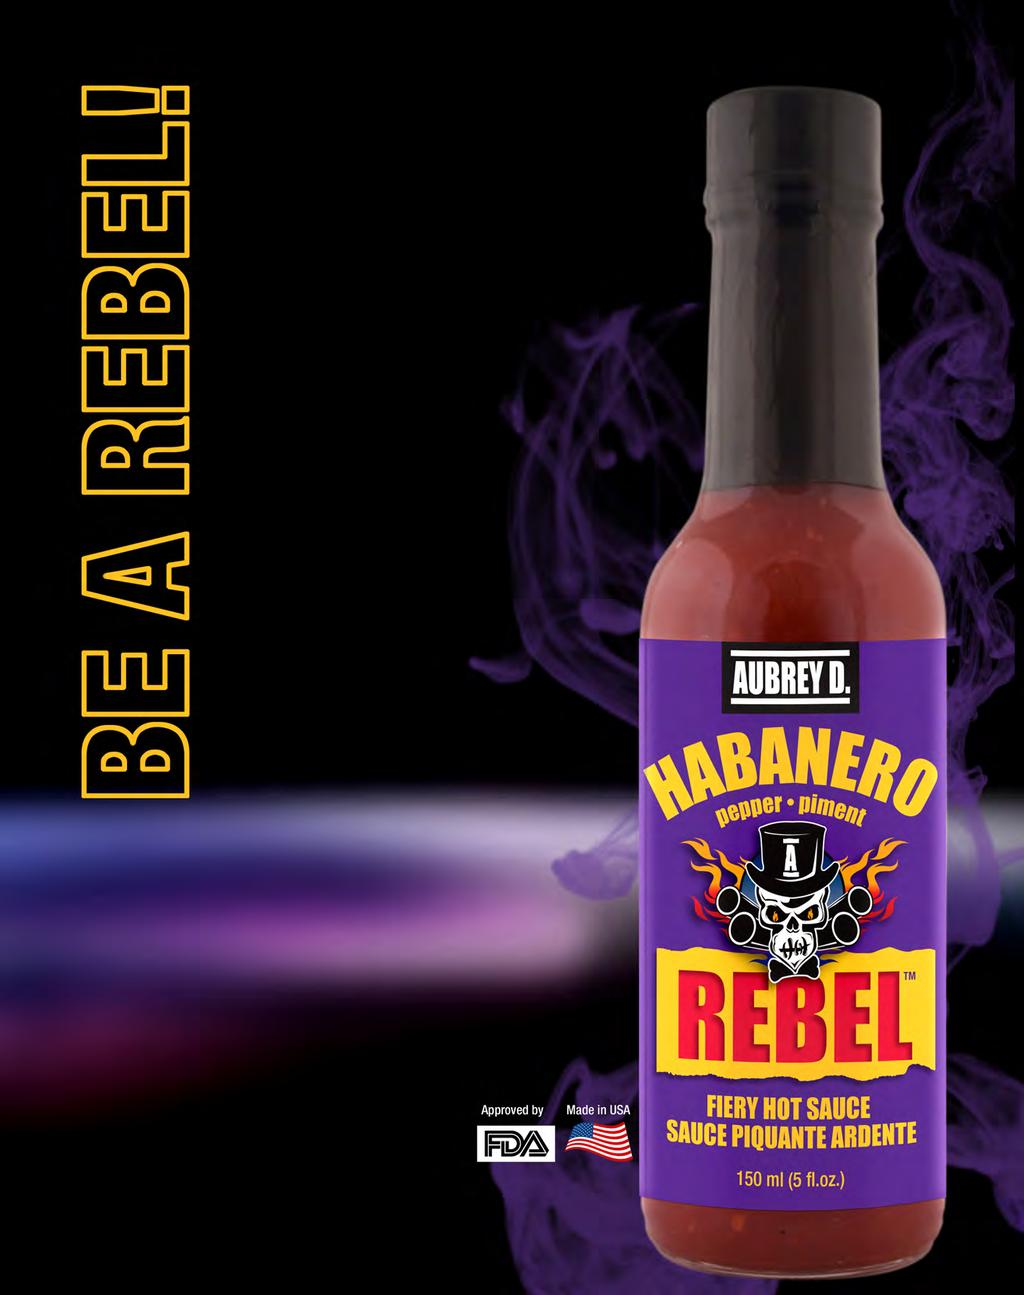 How do you get a bottle full of fiery hot habaneros? WIth Aubrey D. Rebel Habanero Hot Sauce.